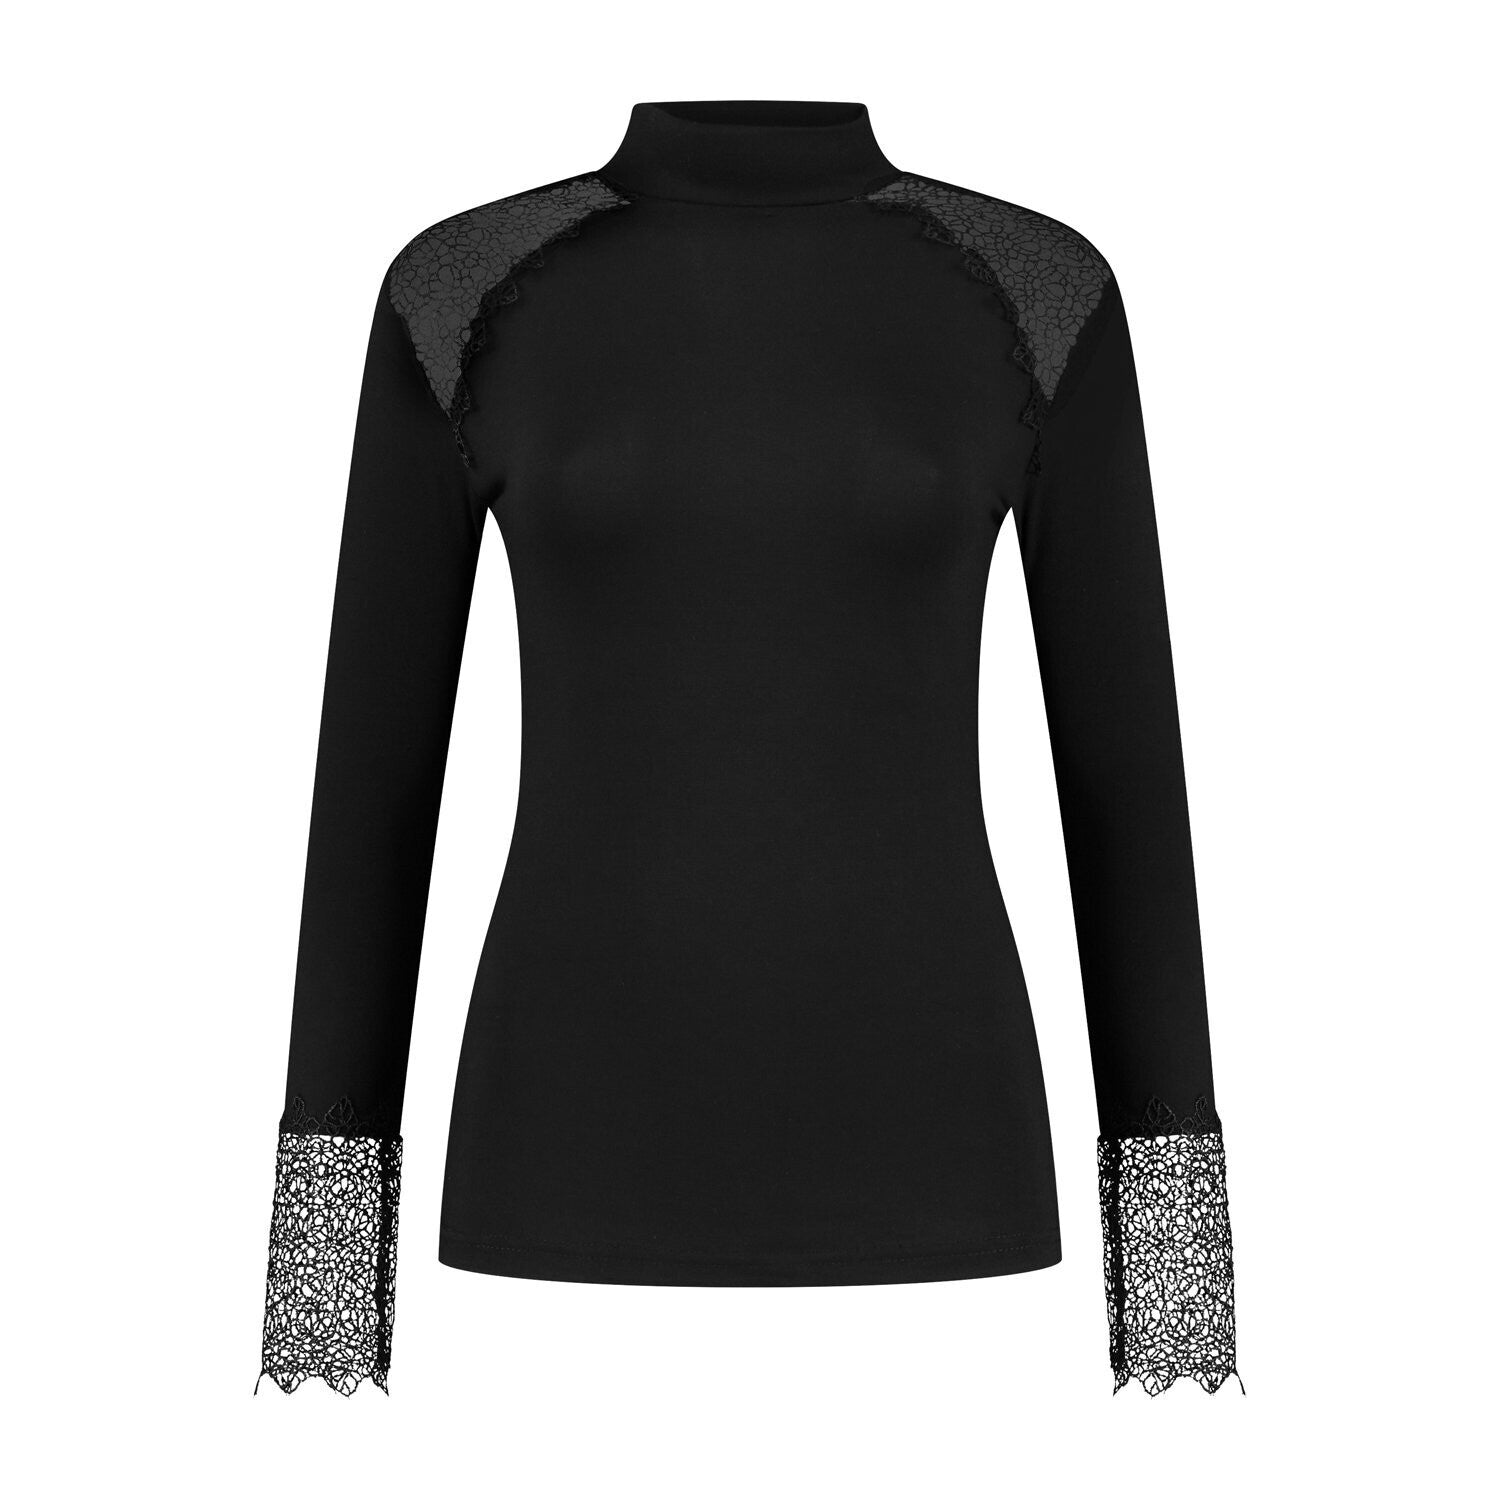 HAYA II - Long sleeved undertop with turtleneck and lace details